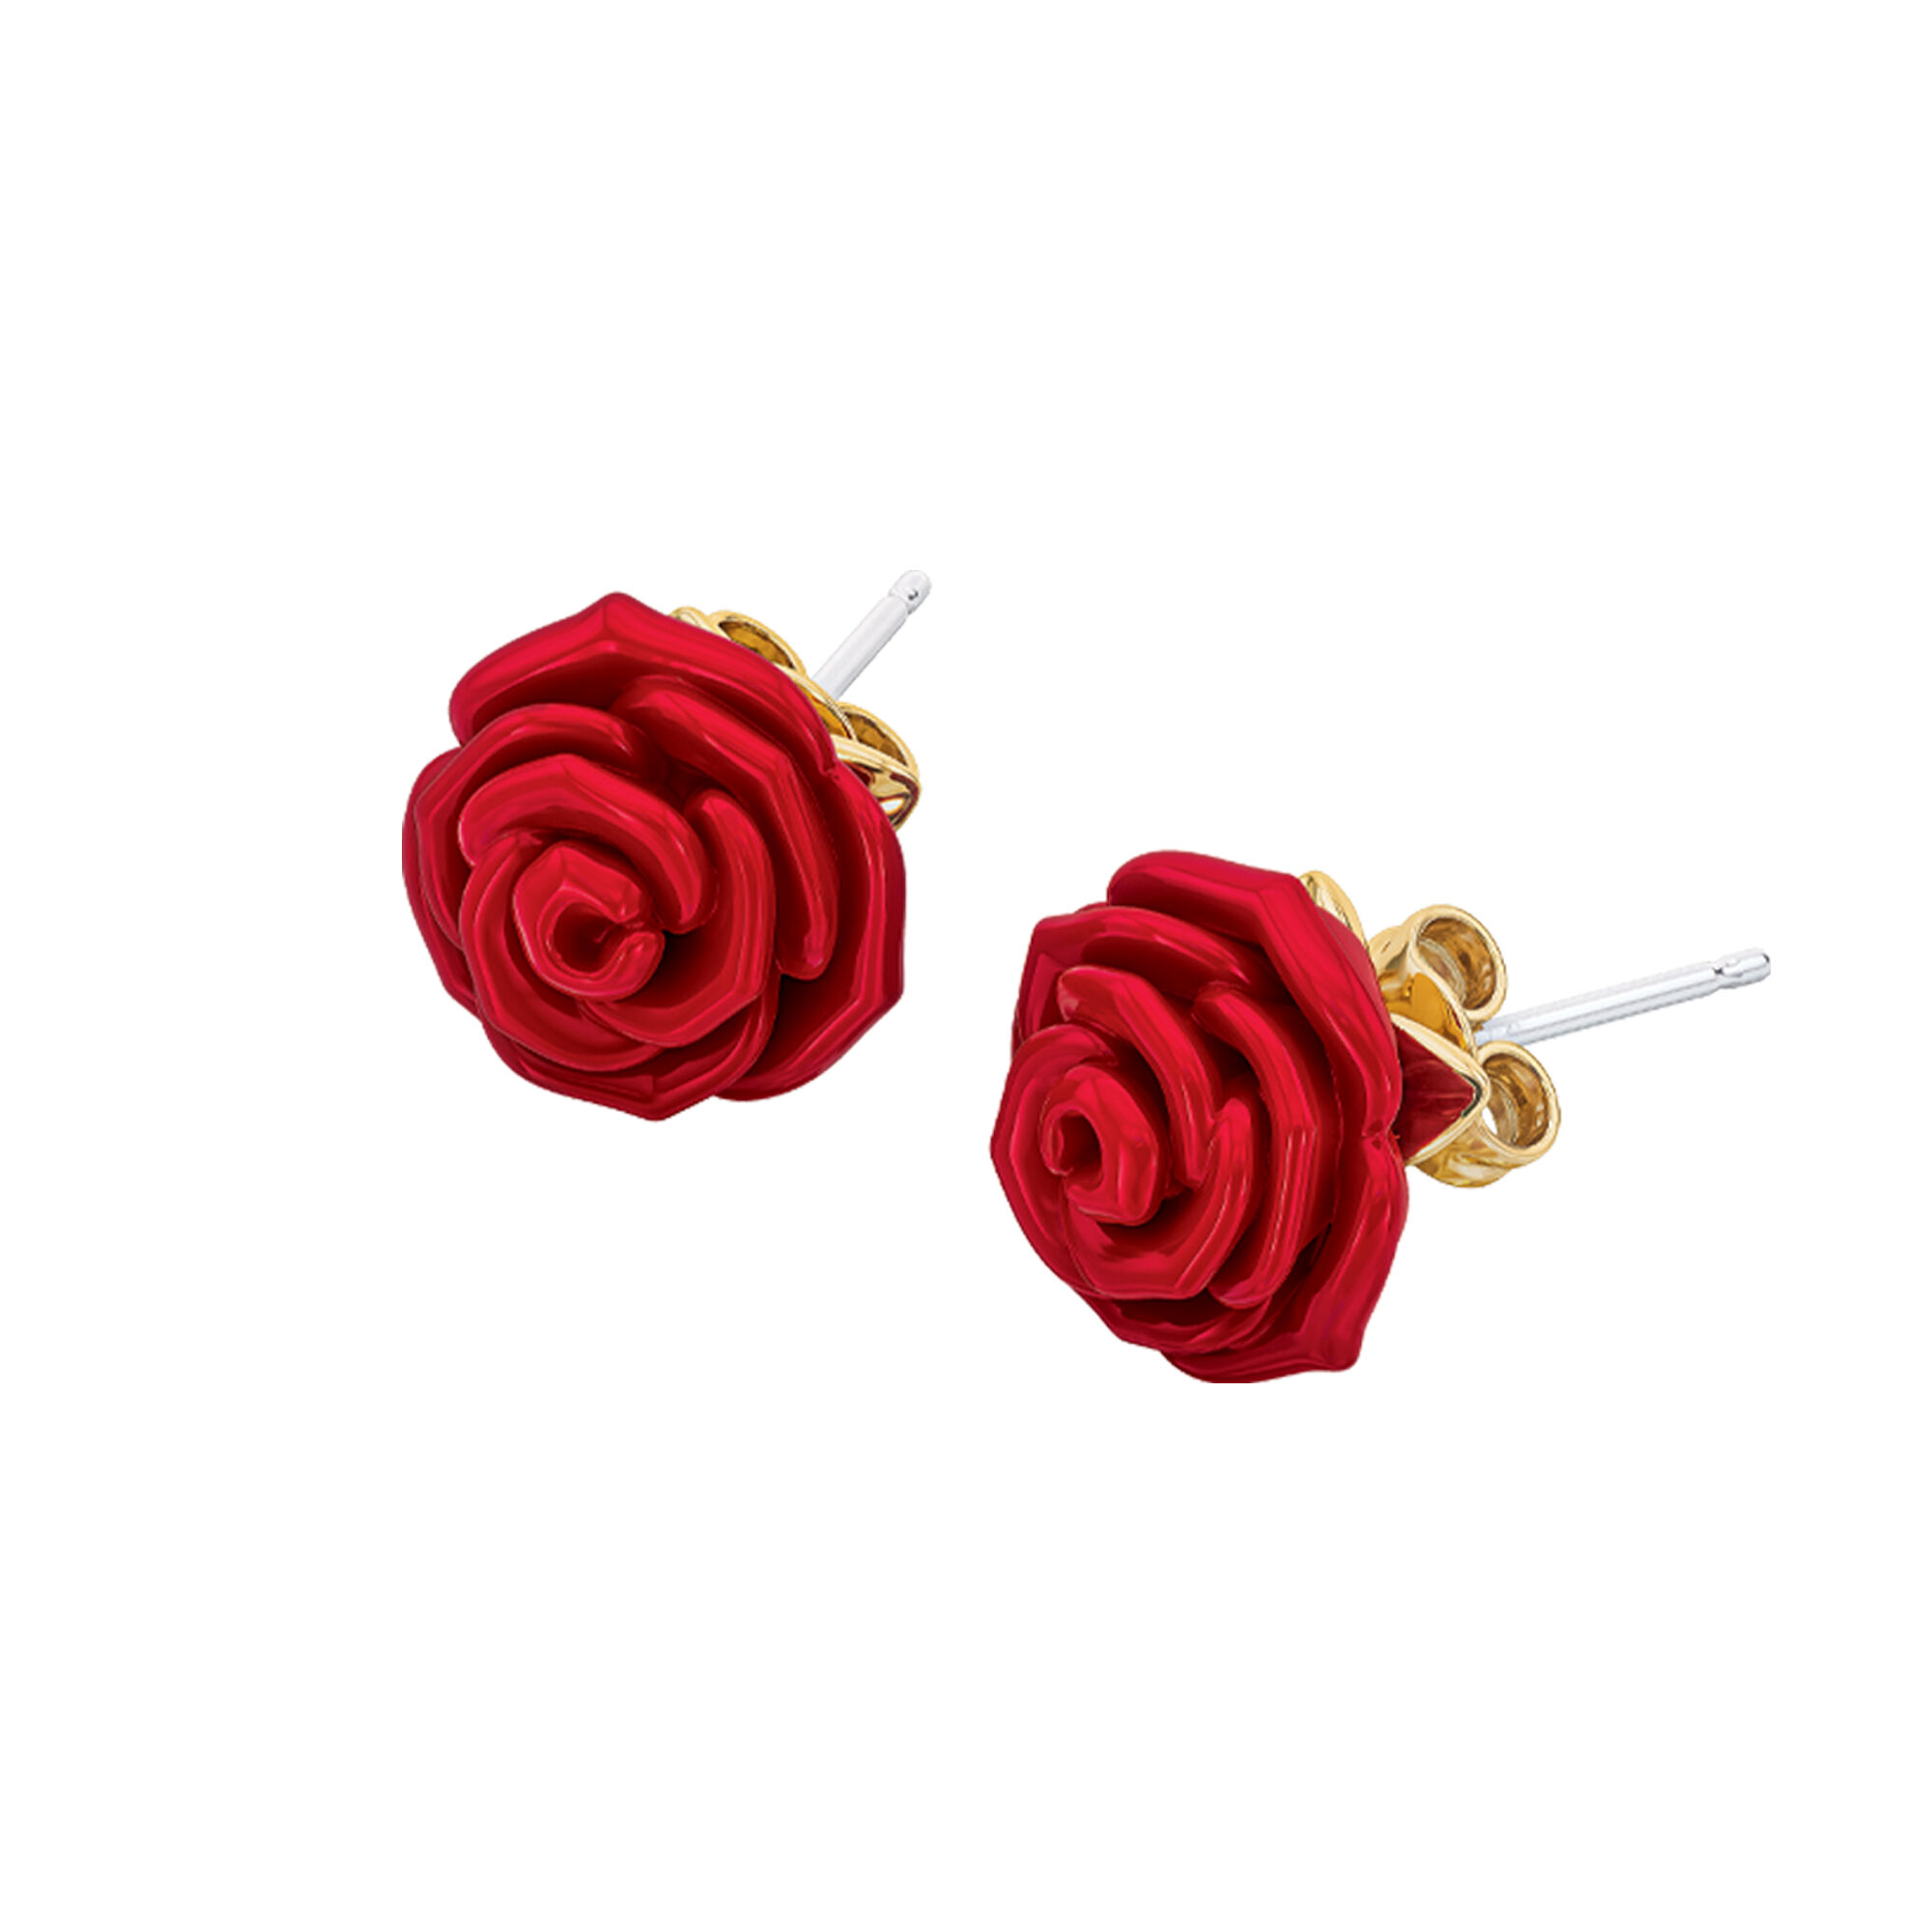 Everlasting Rose Necklace With Earrings 11339 0017 c earing